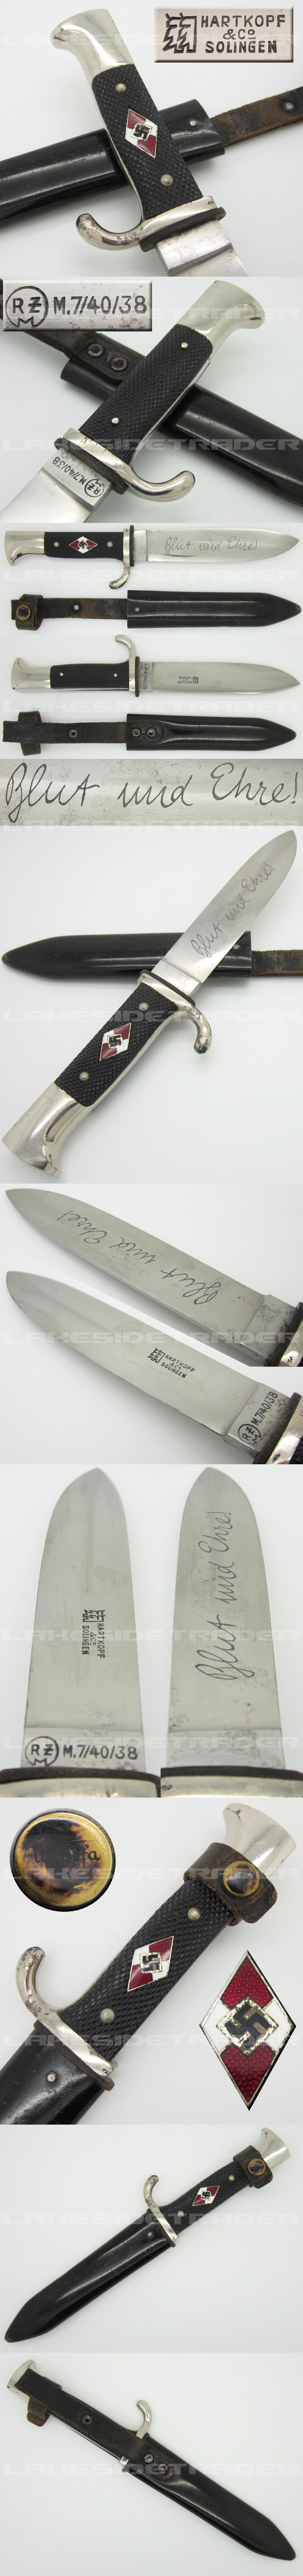 Transitional Hitler Youth Dagger by Harkopf